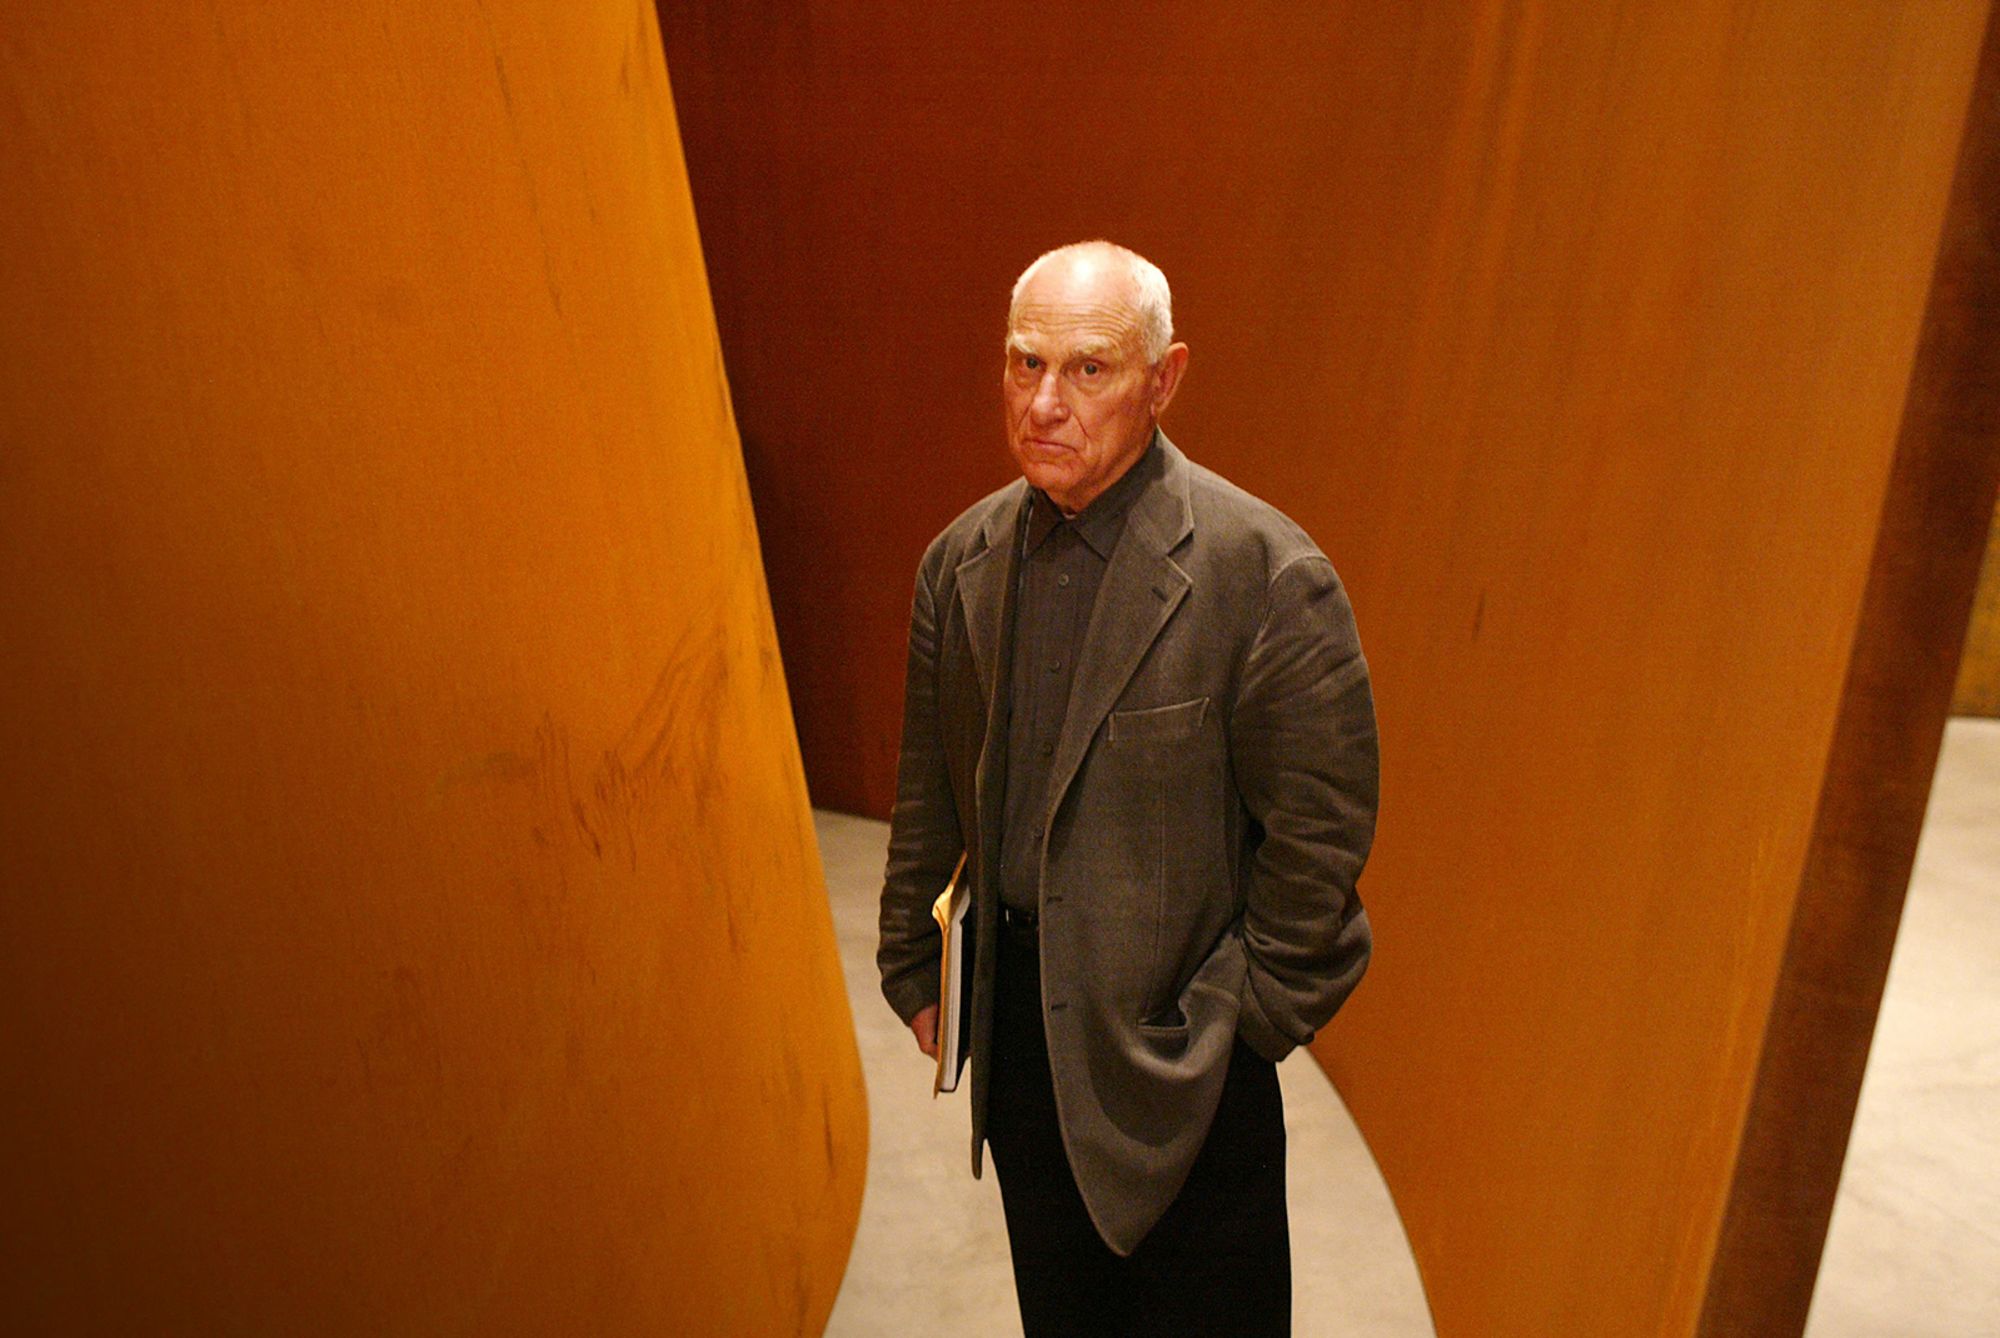 Sculptor Richard Serra poses in front of one of his works featured at the Guggenheim Bilbao Museum exhibition, "The Matter of Time" in 2005.